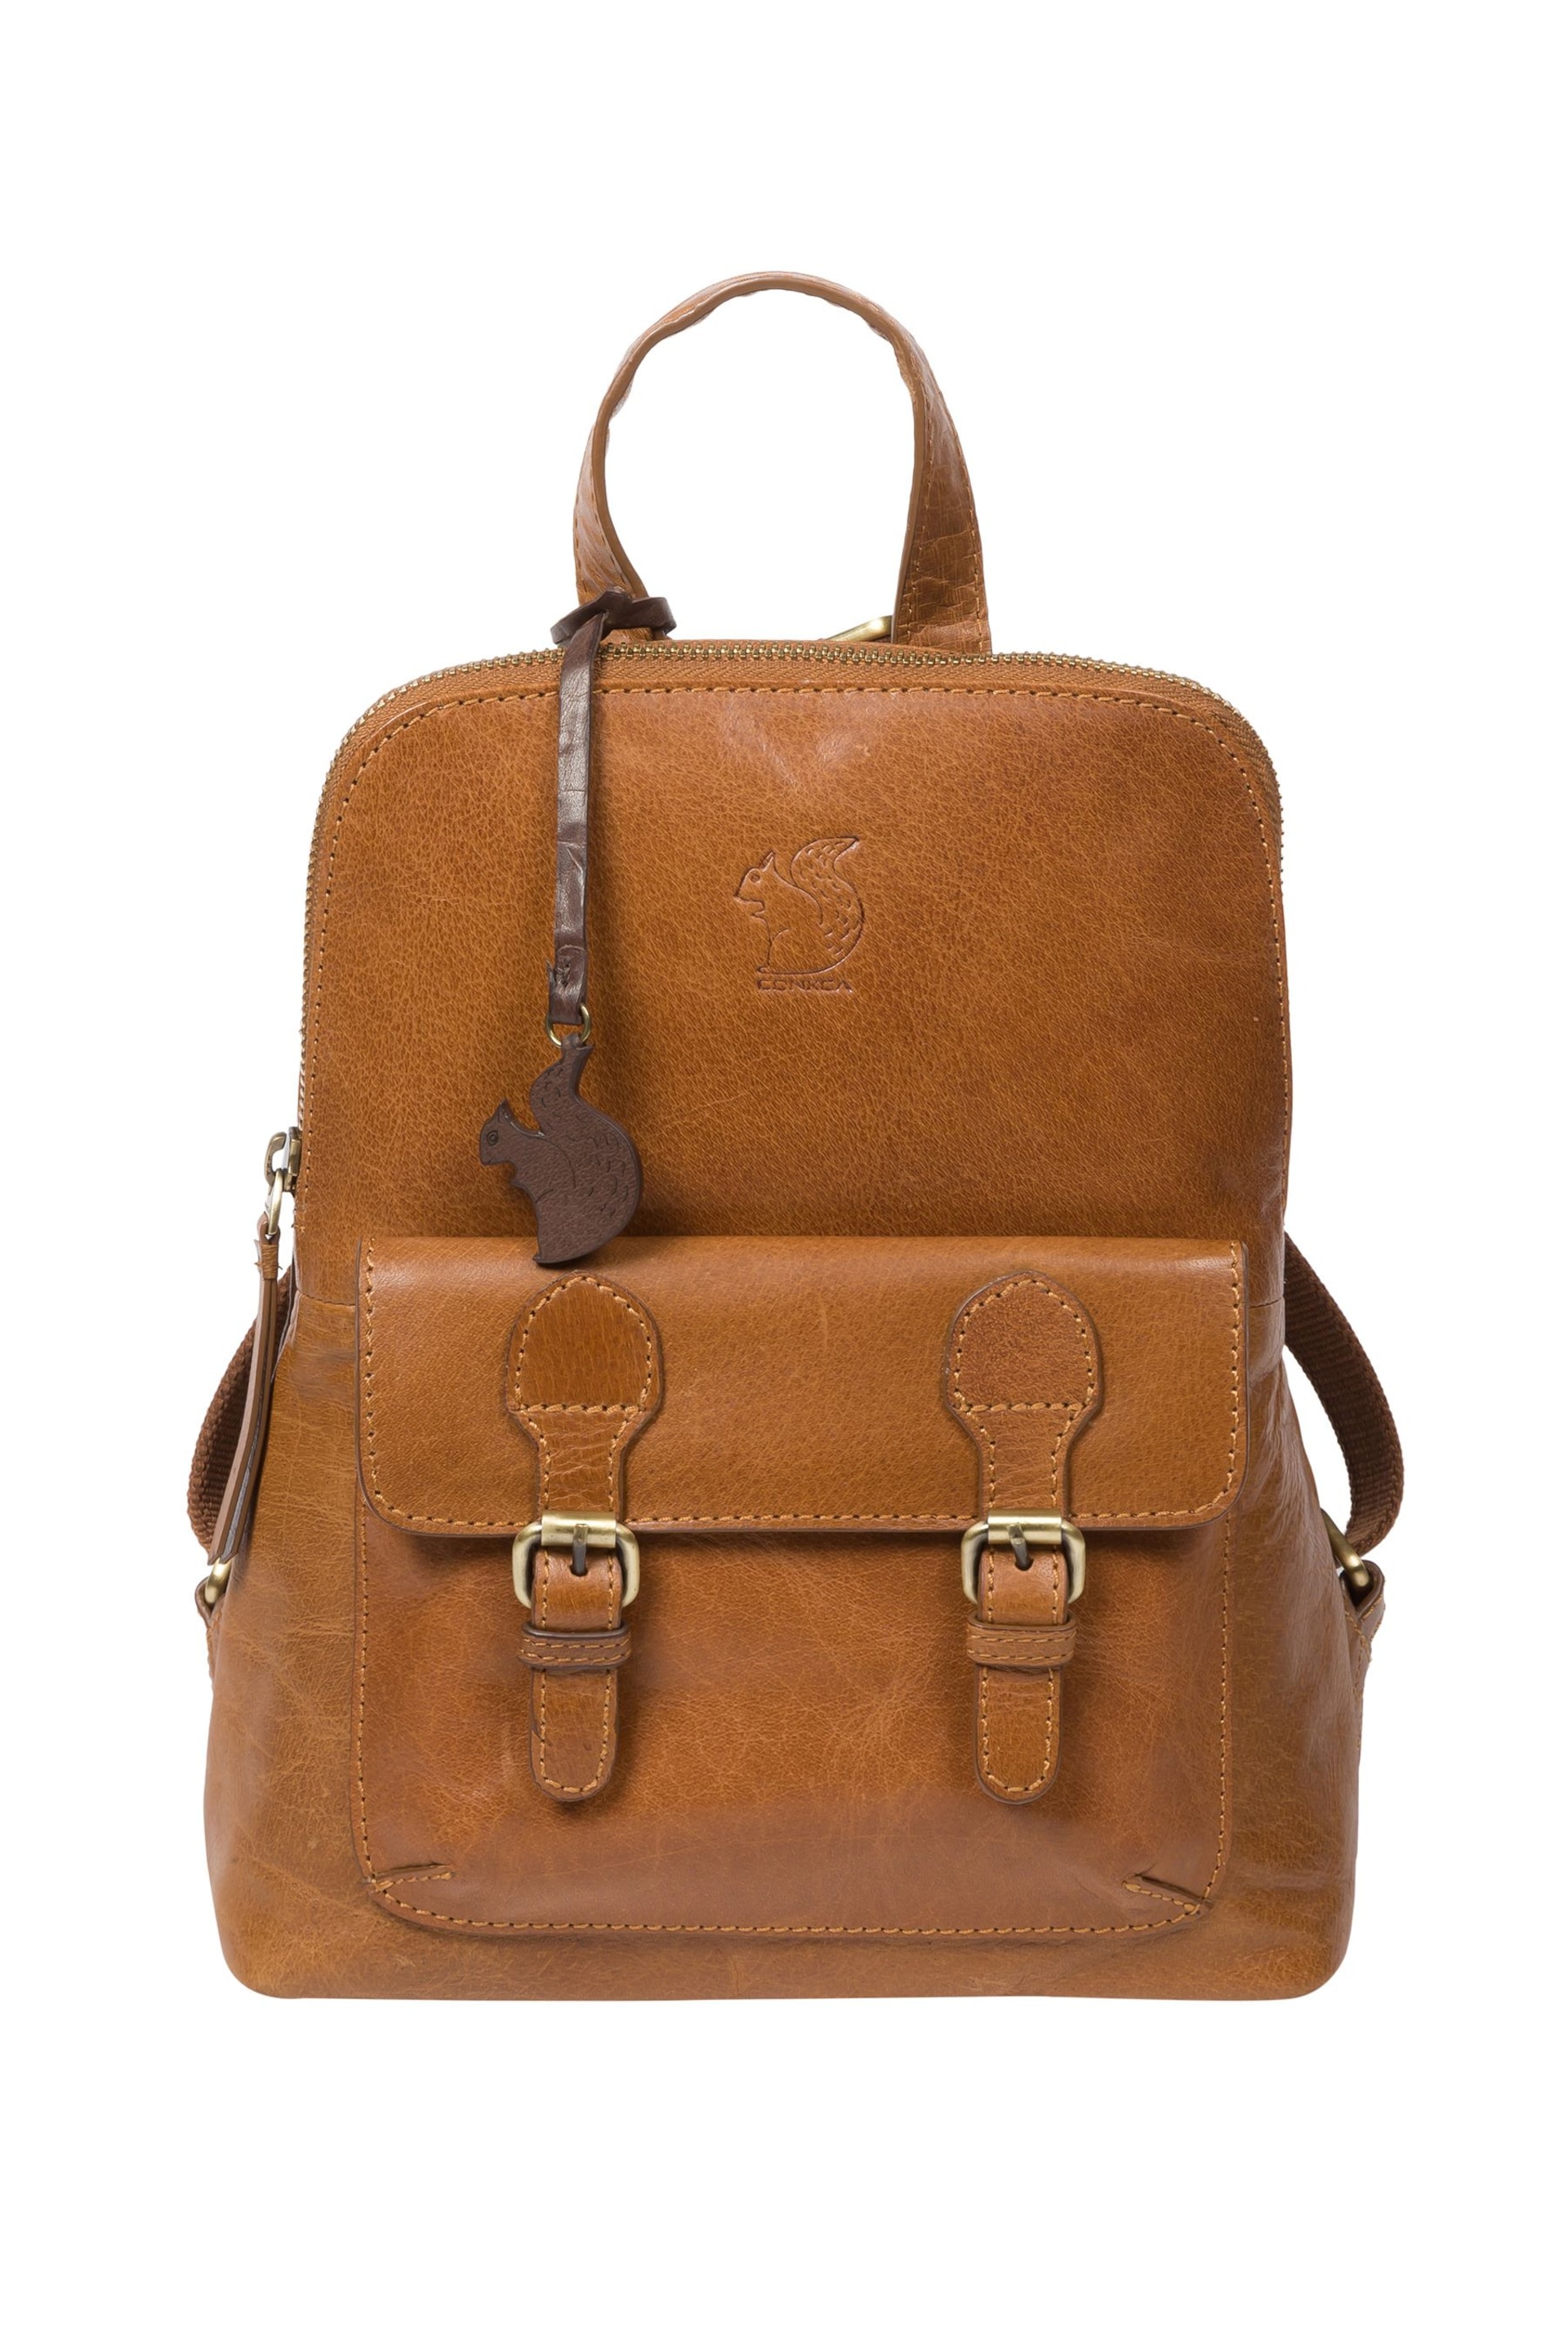 Conkca Kendal Leather Backpack - Image 2 of 6